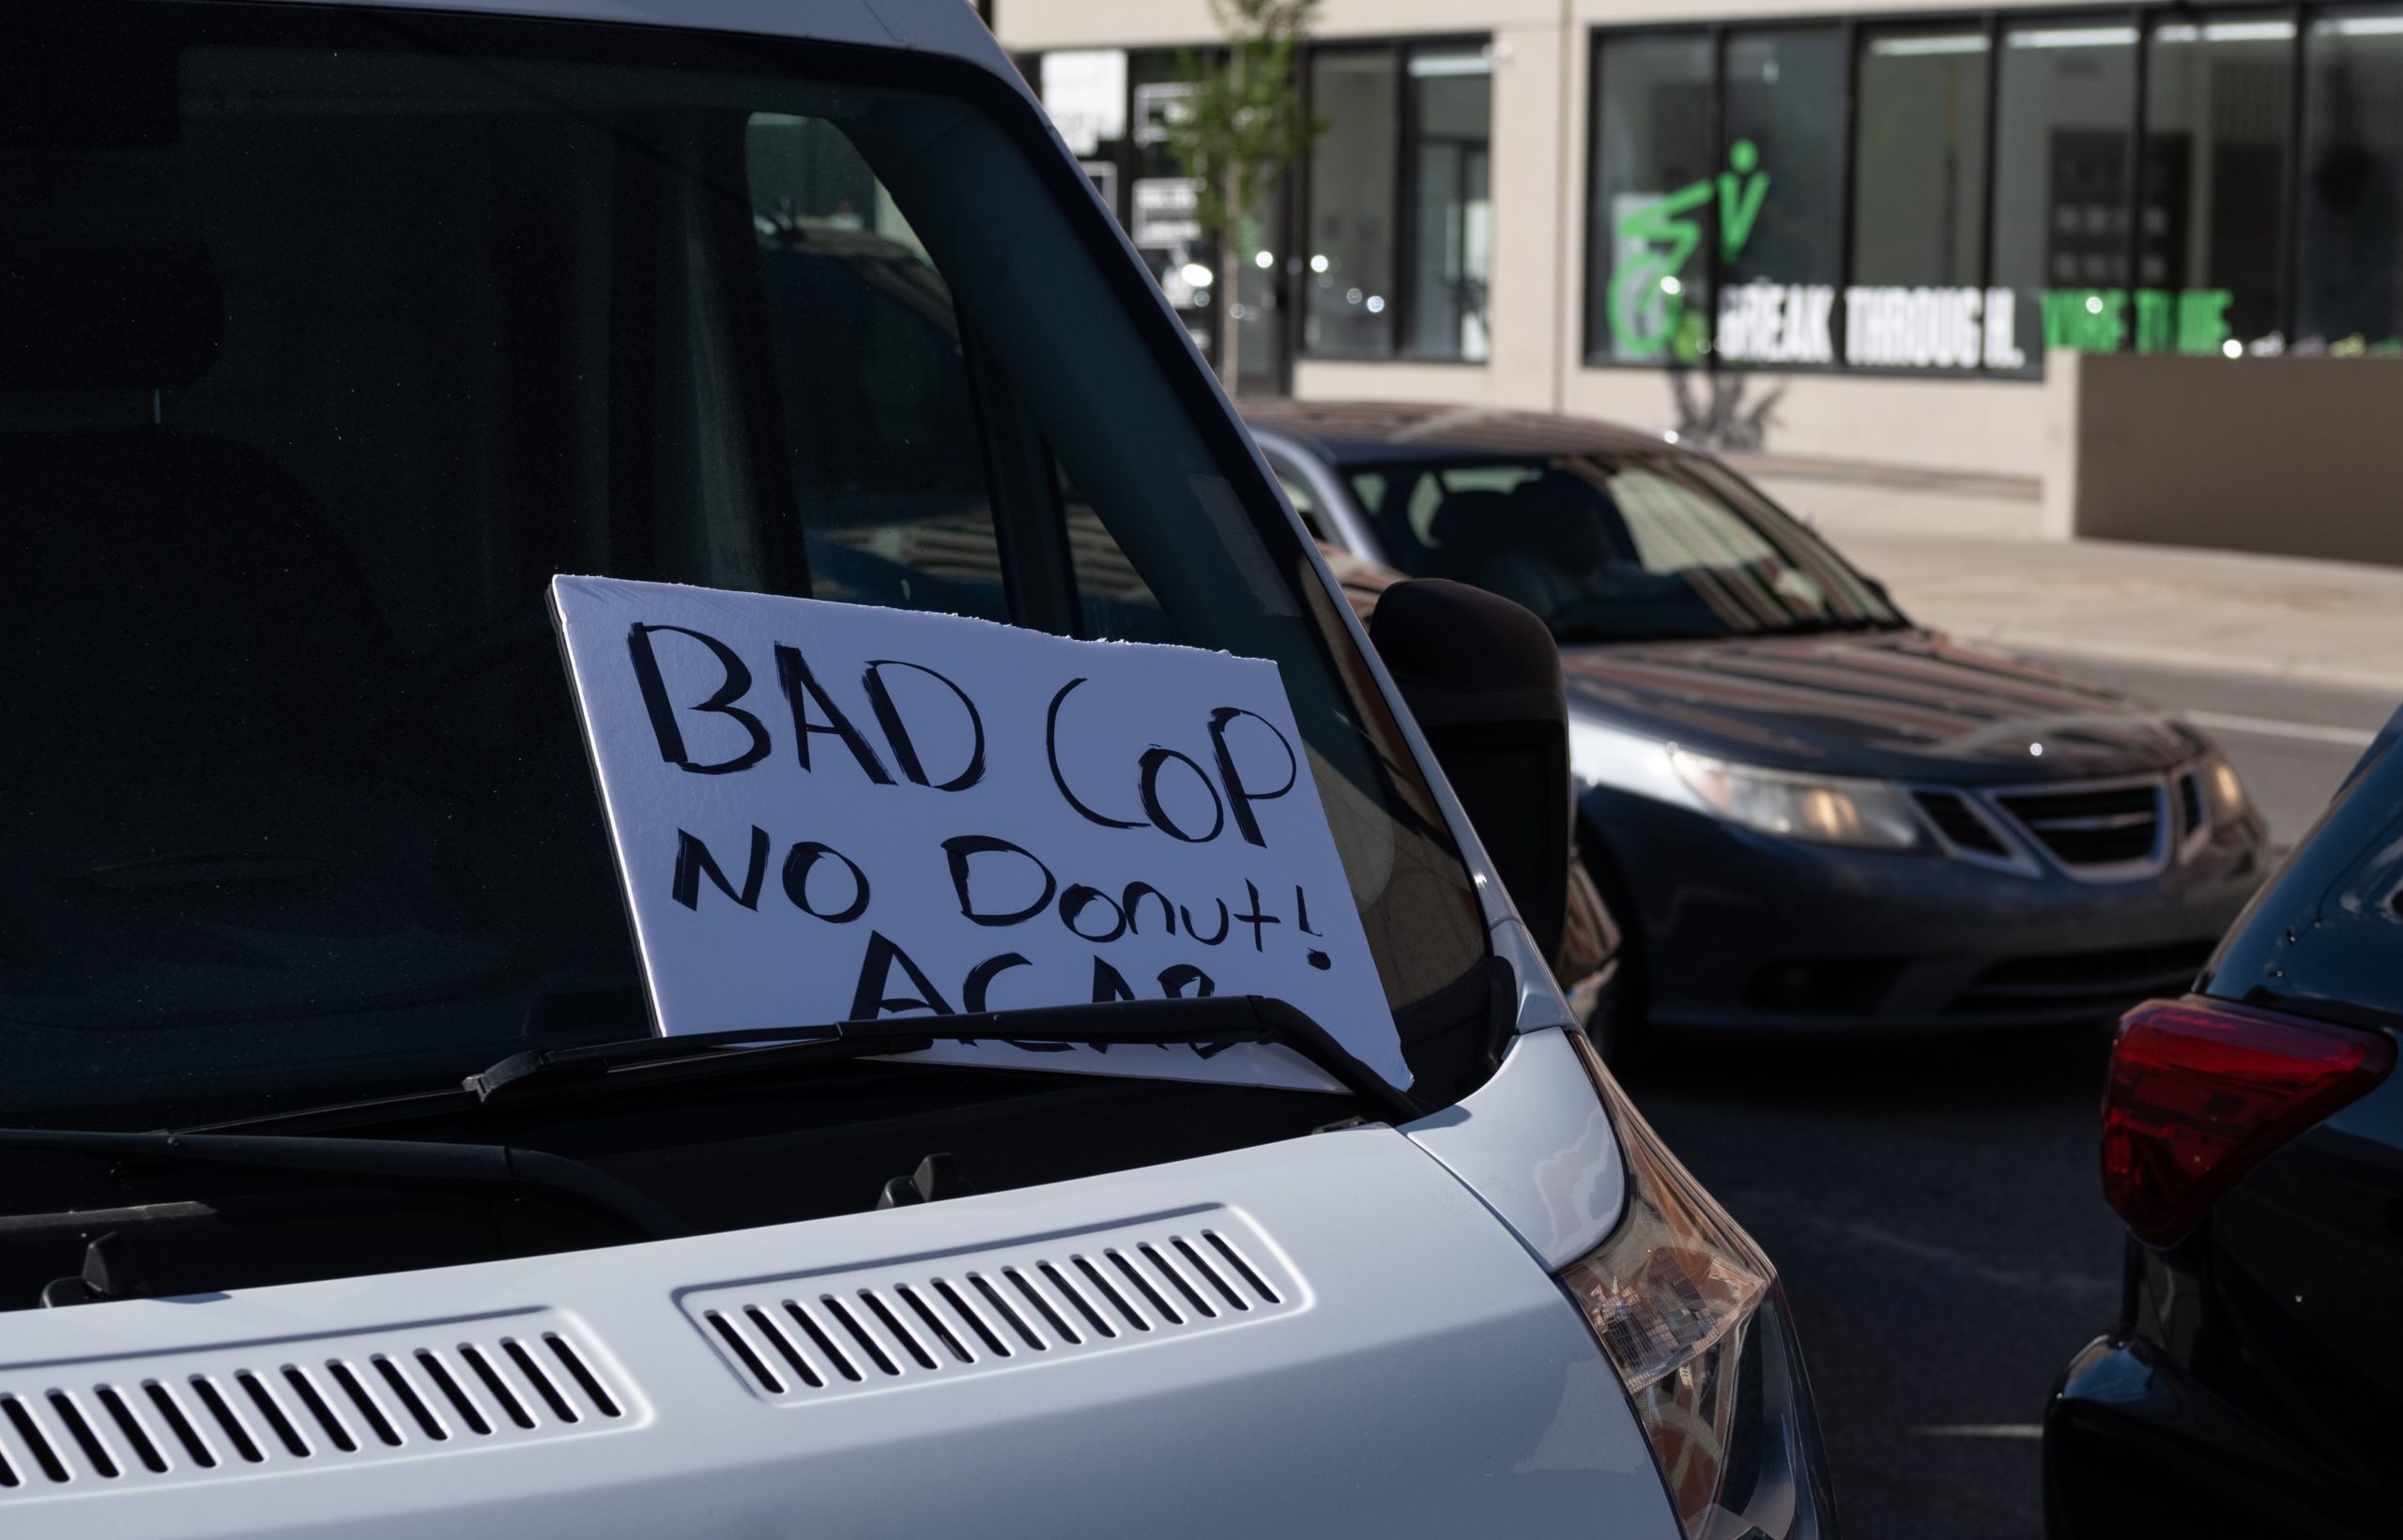 A sign on a van window reads "Bad cop no donut! ACAB" as protesters march in Detroit, Michigan on May 31, 2020 following a night of protests that saw several arrests and uses of tear gas by the Detroit Police department on what was peaceful protesting. - Thousands of National Guard troops patrolled major US cities after five consecutive nights of protests over racism and police brutality that boiled over into arson and looting, sending shock waves through the country. The death Monday of an unarmed black man, George Floyd, at the hands of police in Minneapolis ignited this latest wave of outrage in the US over law enforcement's repeated use of lethal force against African Americans -- this one like others before captured on cellphone video. (Photo by SETH HERALD / AFP) (Photo by SETH HERALD/AFP via Getty Images)